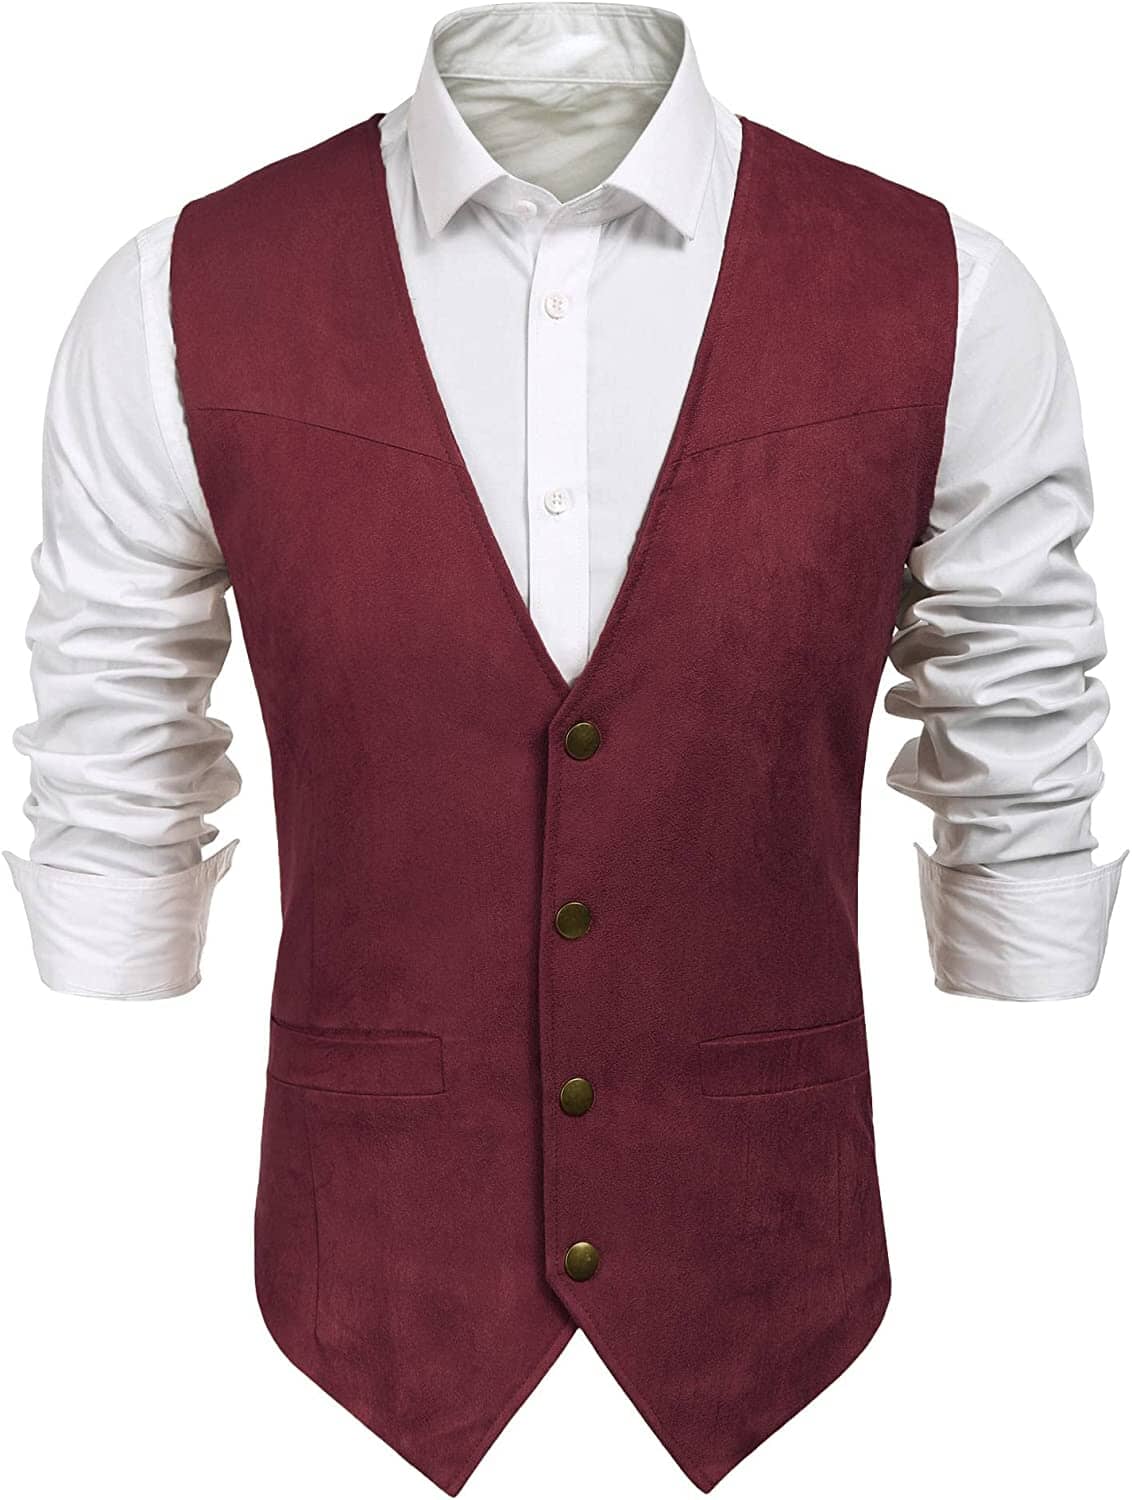 Solid Suede Leather Suit Vest (US Only) Vest COOFANDY Store Wine Red S 